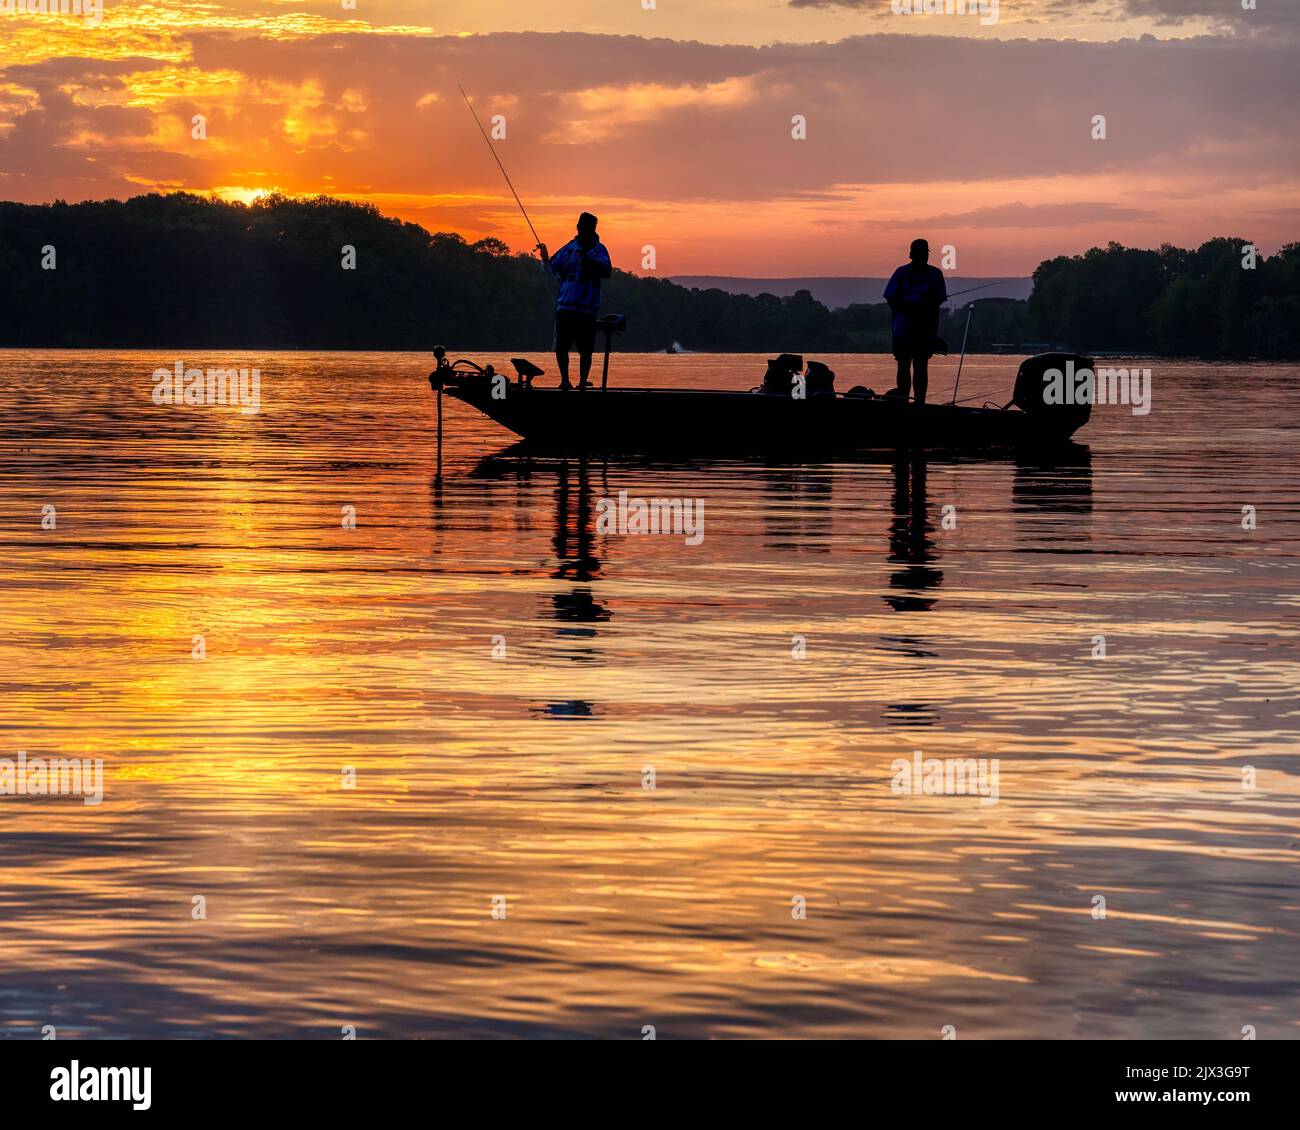 Two men bass fishing in a bass boat on Tims Ford lake in Tennessee with early morning sunrise silhouette. Stock Photo